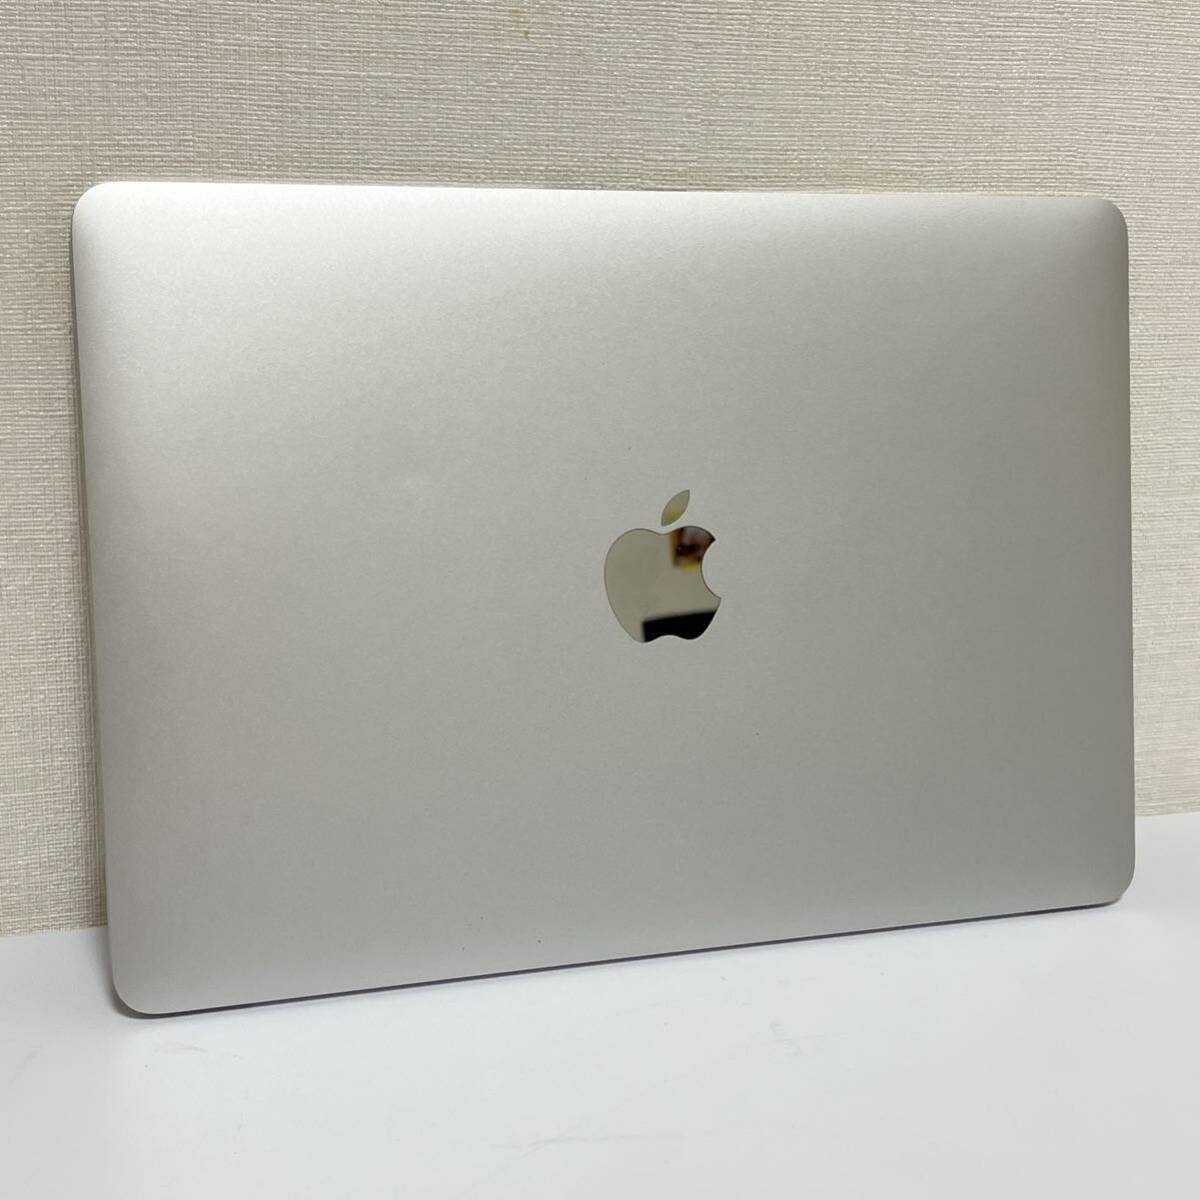 **1 jpy start ** free shipping ** Apple MacBook 12 -inch Early 2015 silver A1534 operation verification settled 